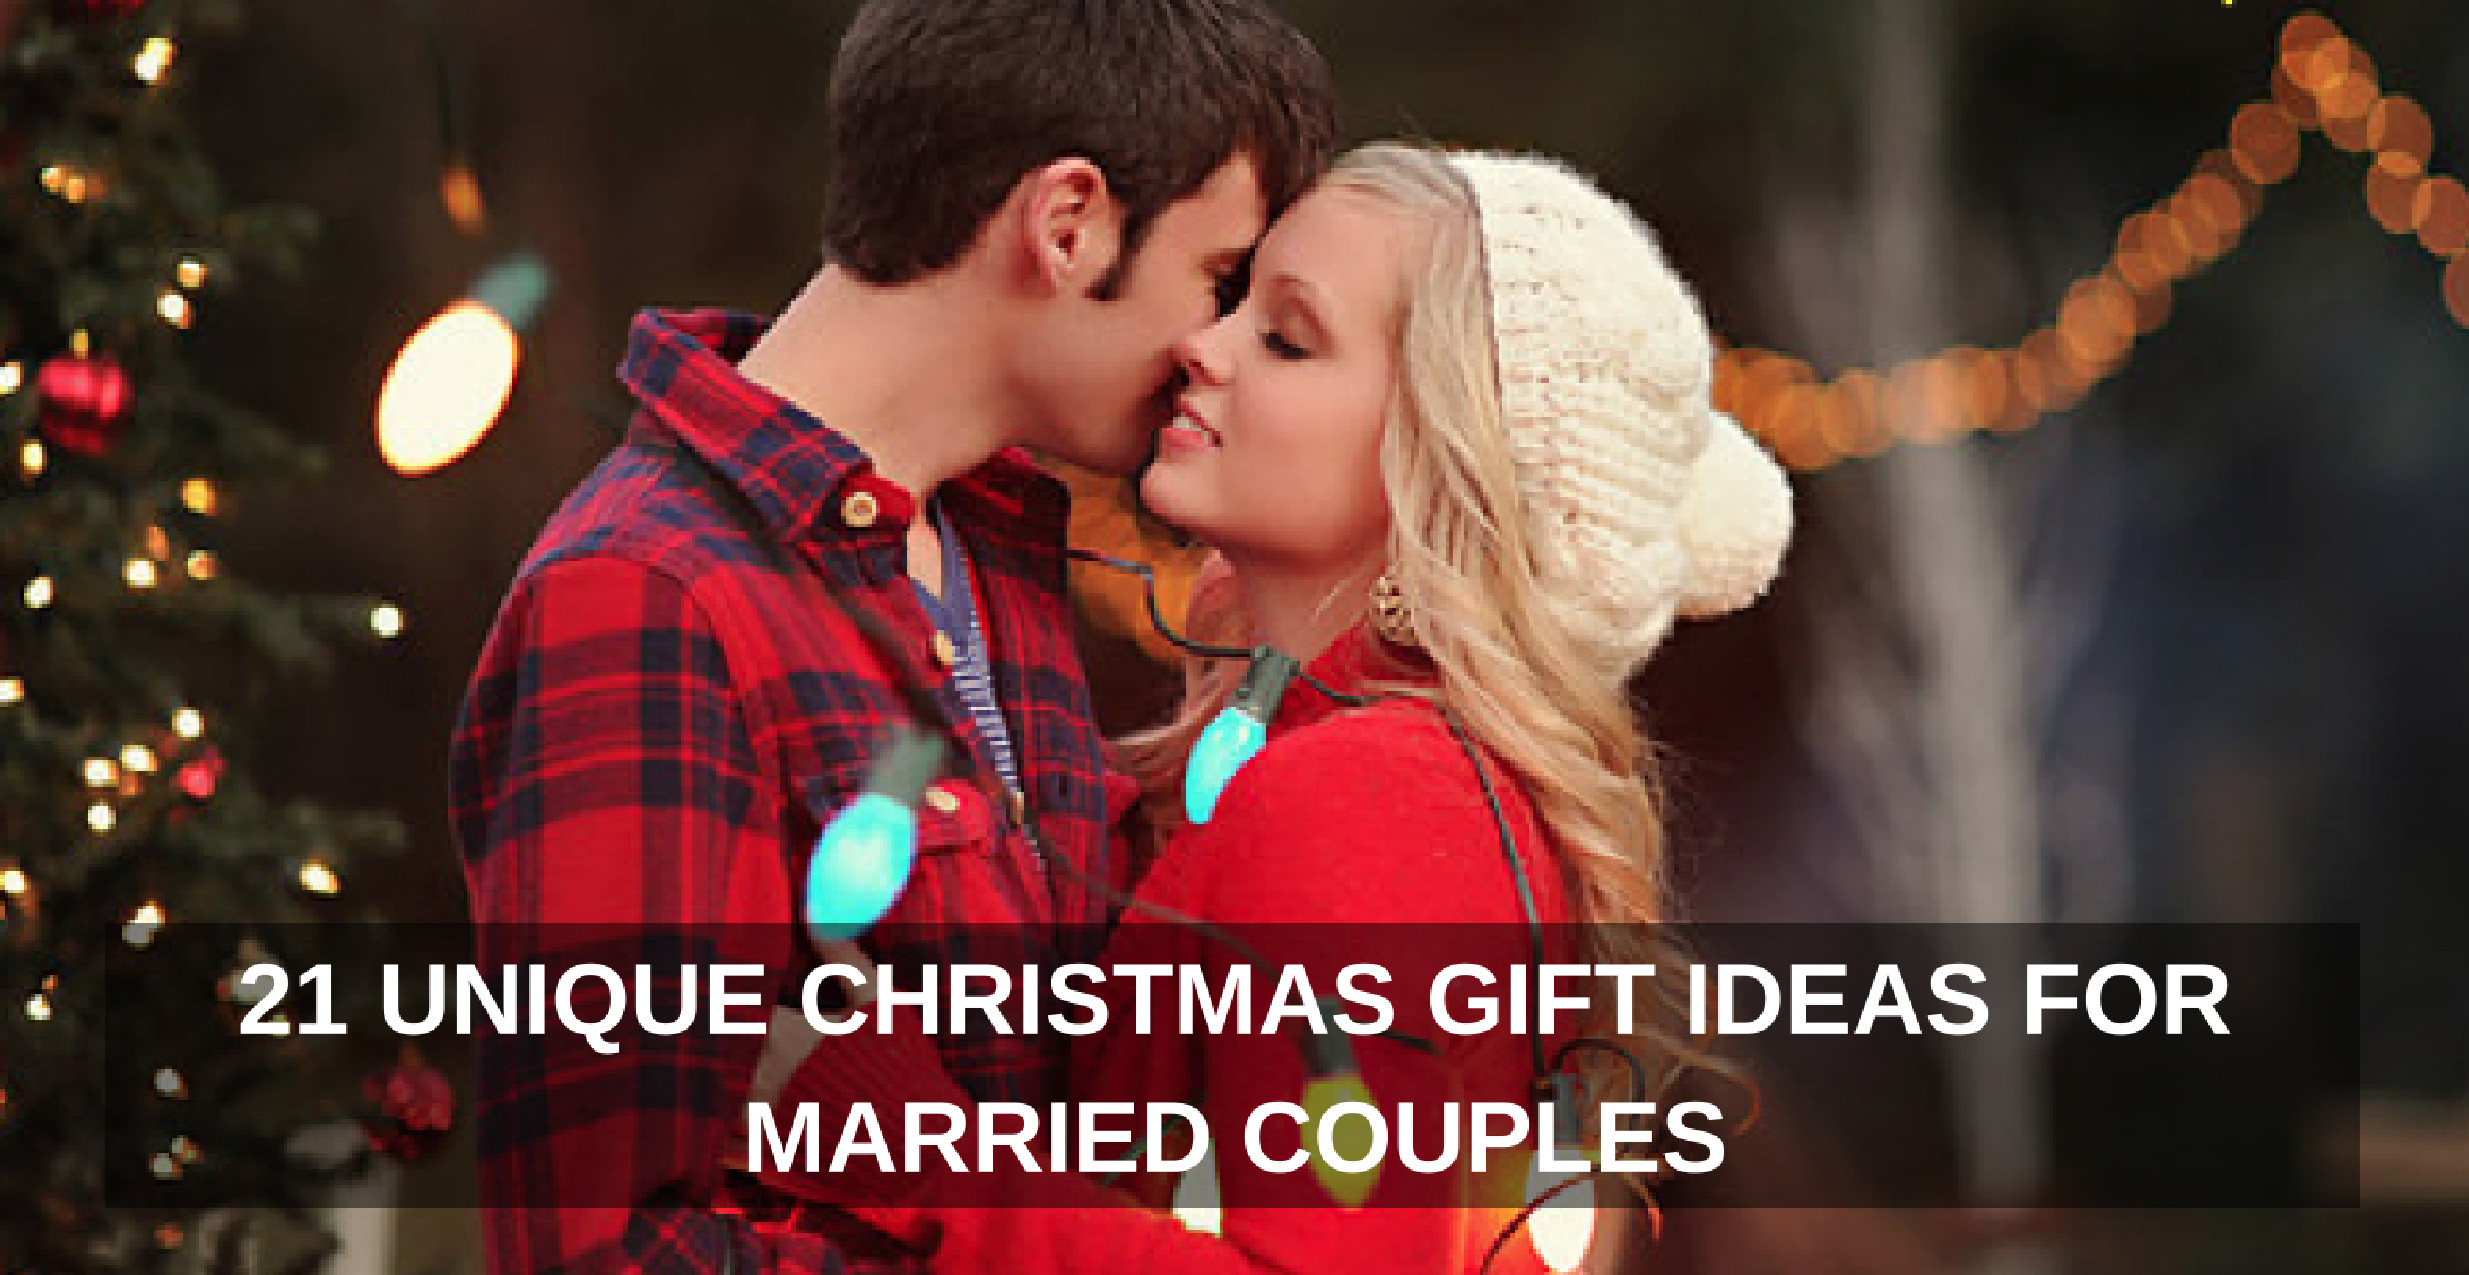 Christmas Gift Ideas For Older Couples
 21 Unique Christmas Gift Ideas for Married Couples